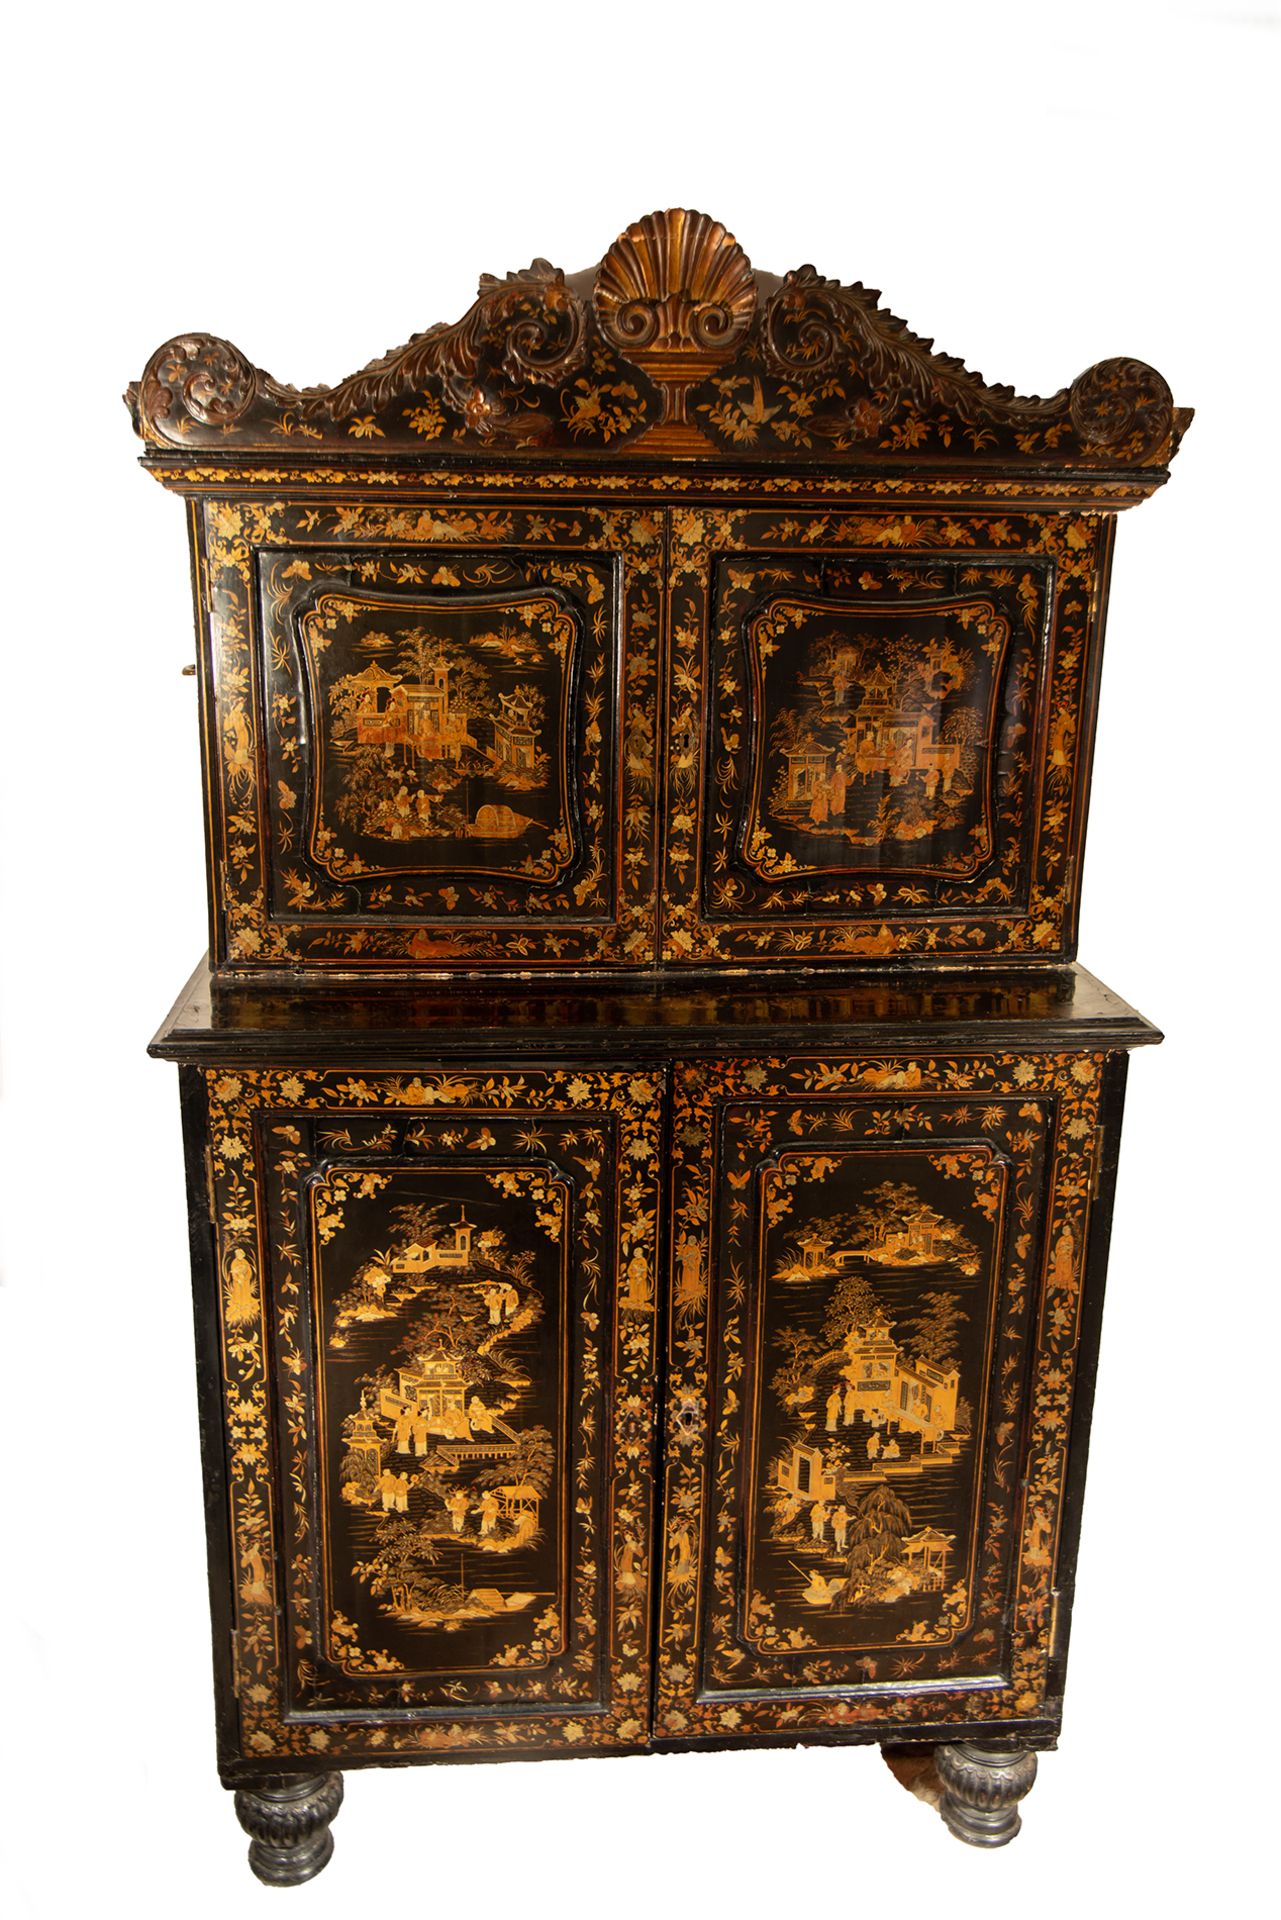 Important Cantonese Commode in lacquered, gilt and polychrome wood, Cantonese work for export, China - Image 2 of 13